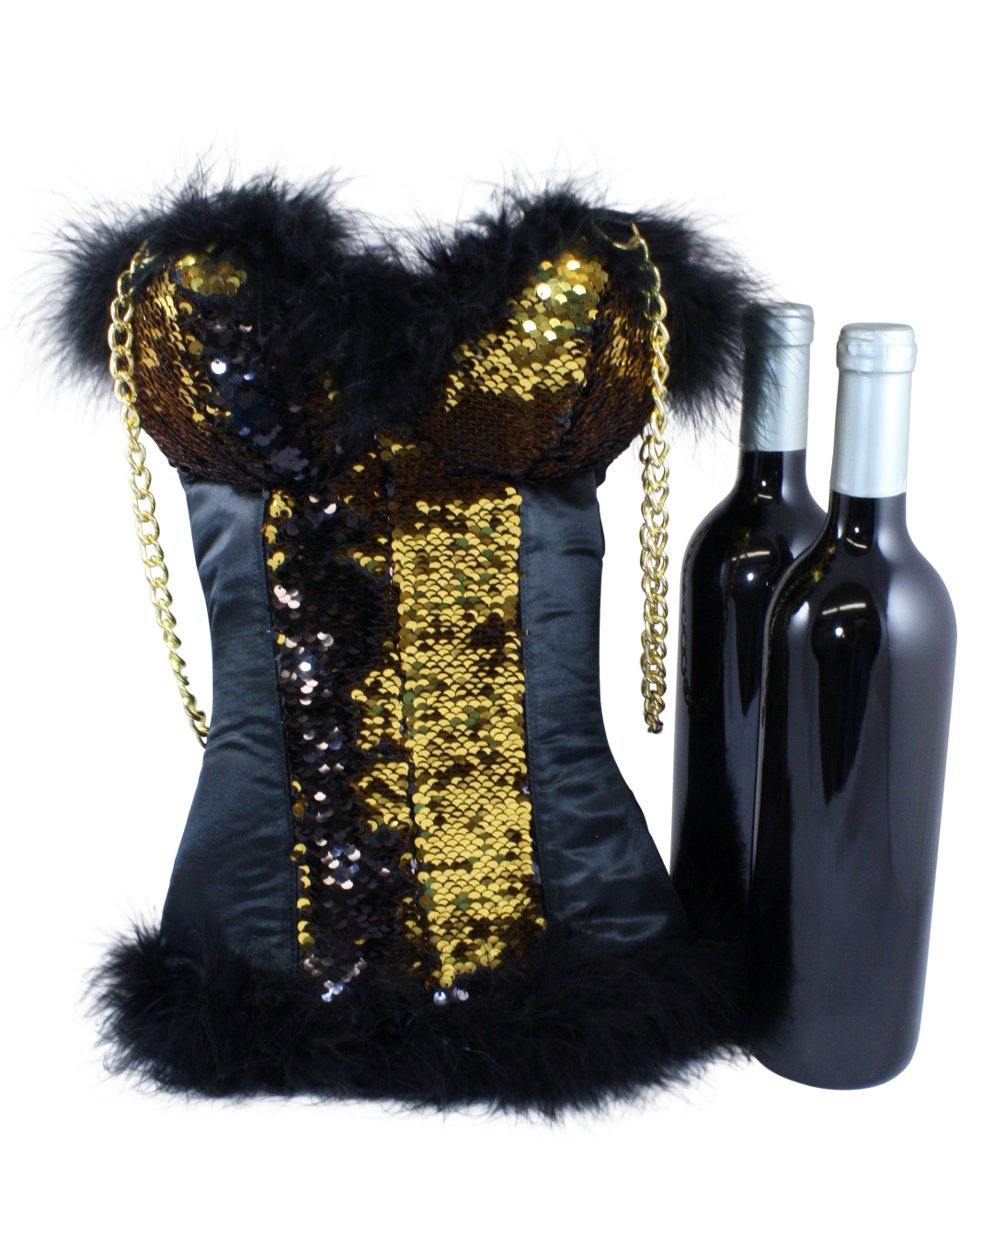 Wine Bag for 2 bottles - wine or spirits in Gold Sequins by Tipsy Totes